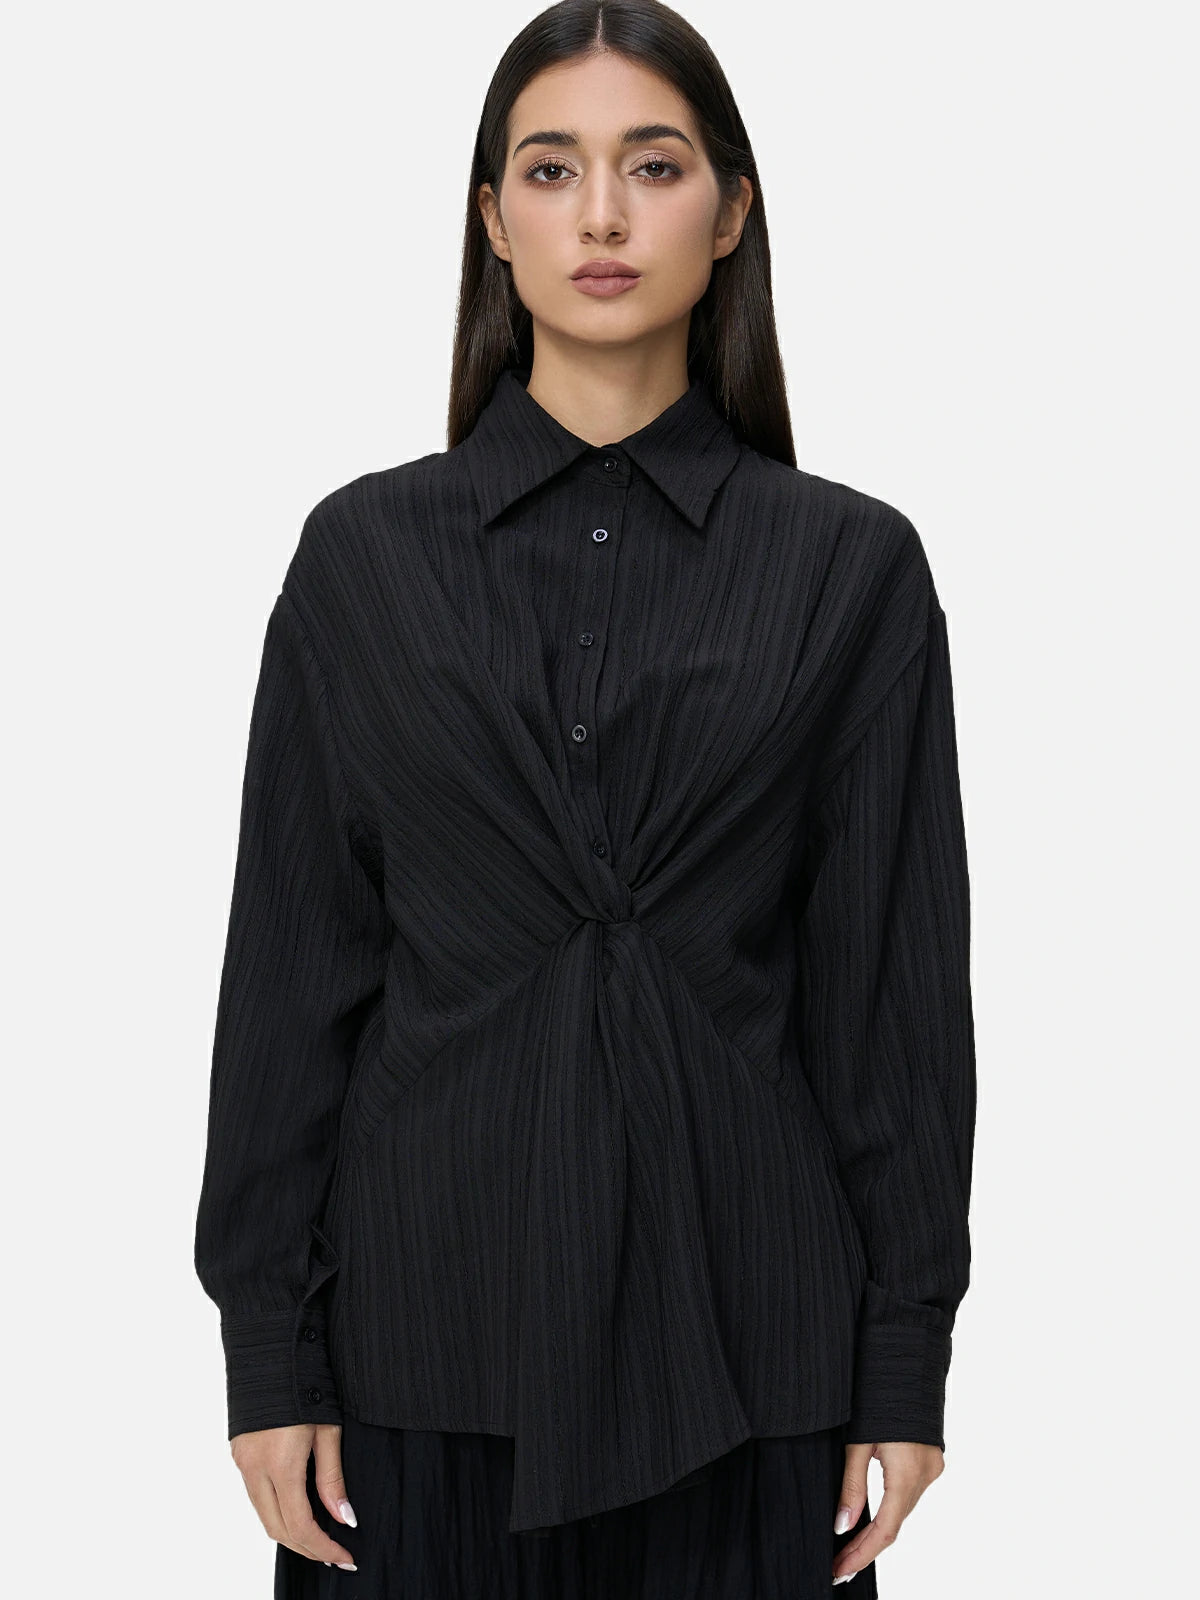 Stylish black shirt with striped and front knot design